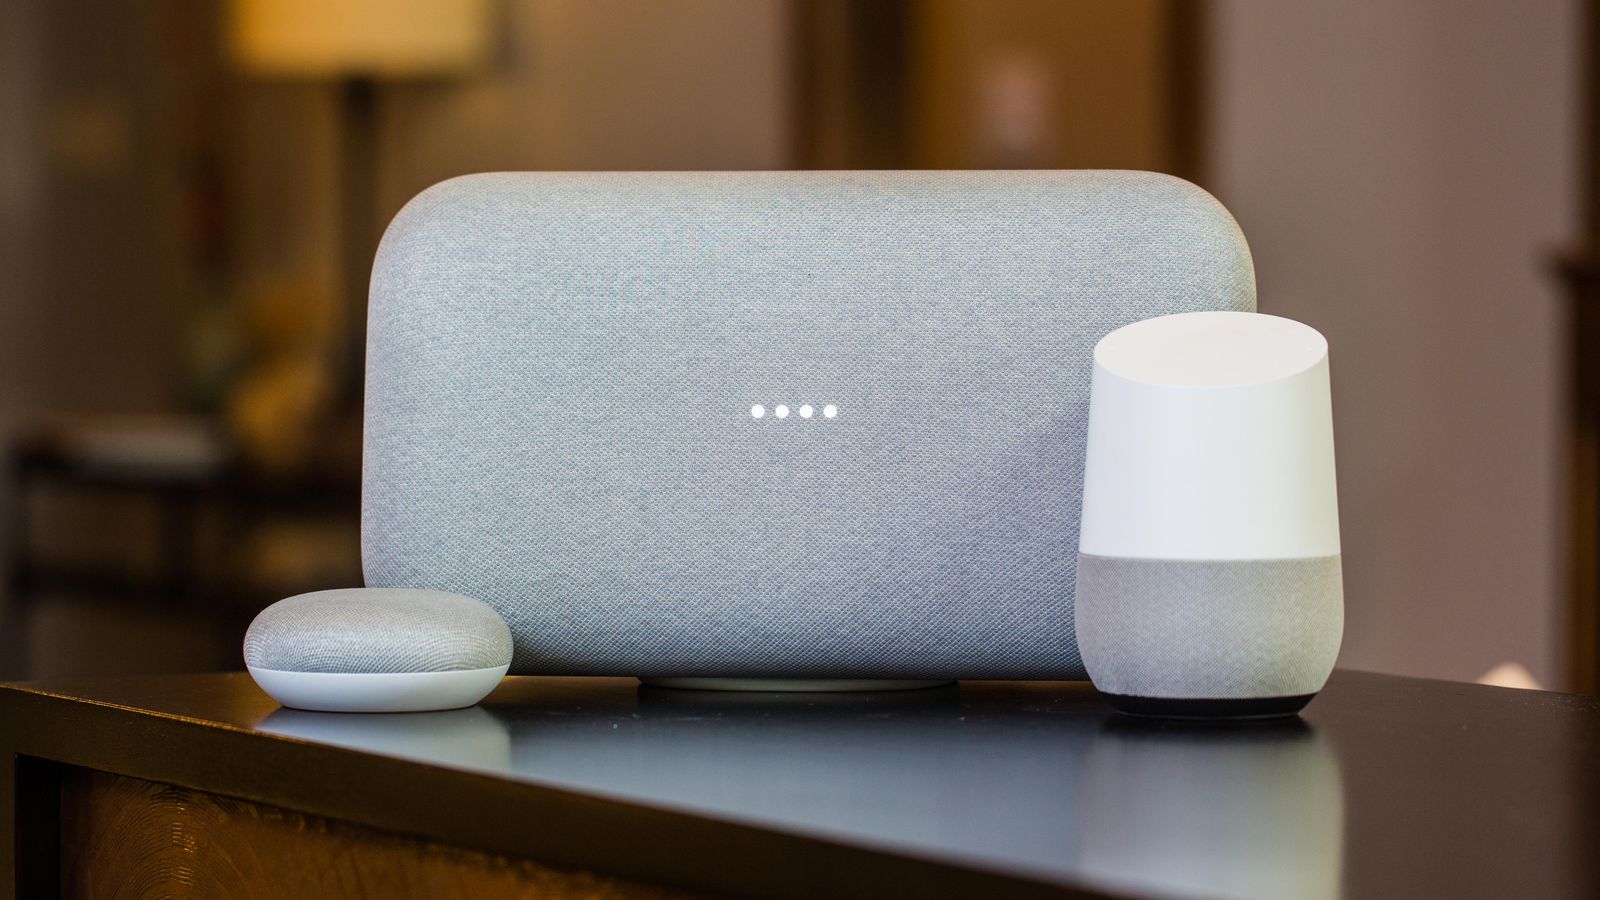 5 Things Google Home Can Do For You